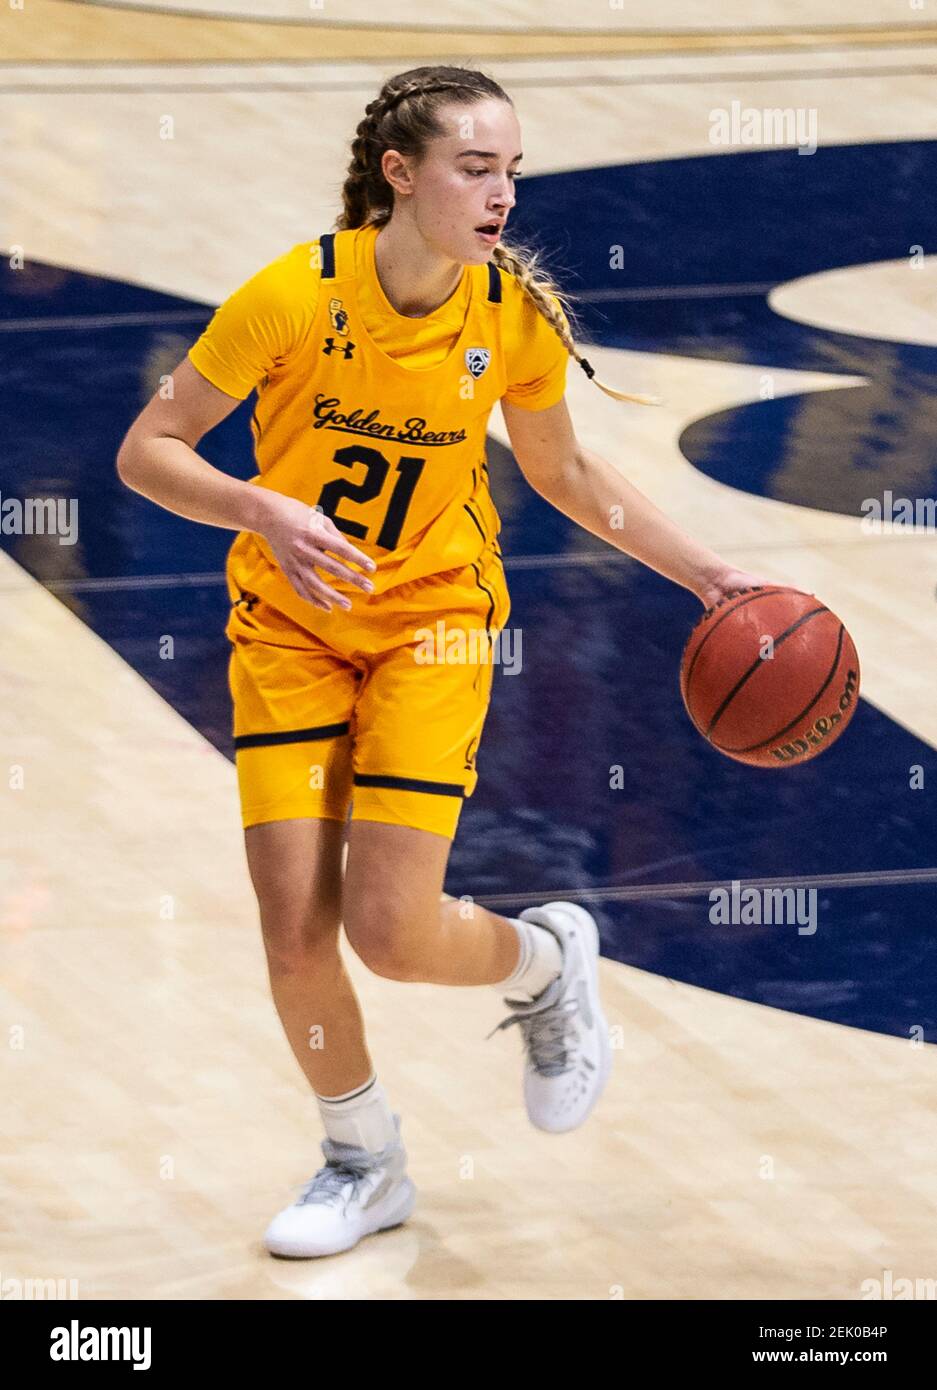 Berkeley, CA U.S. 21st Feb, 2021. A. California guard Mia Mastrov (21)  looks to pass the ball during the NCAA Women's Basketball game between  Arizona State Sun Devils and the California Golden